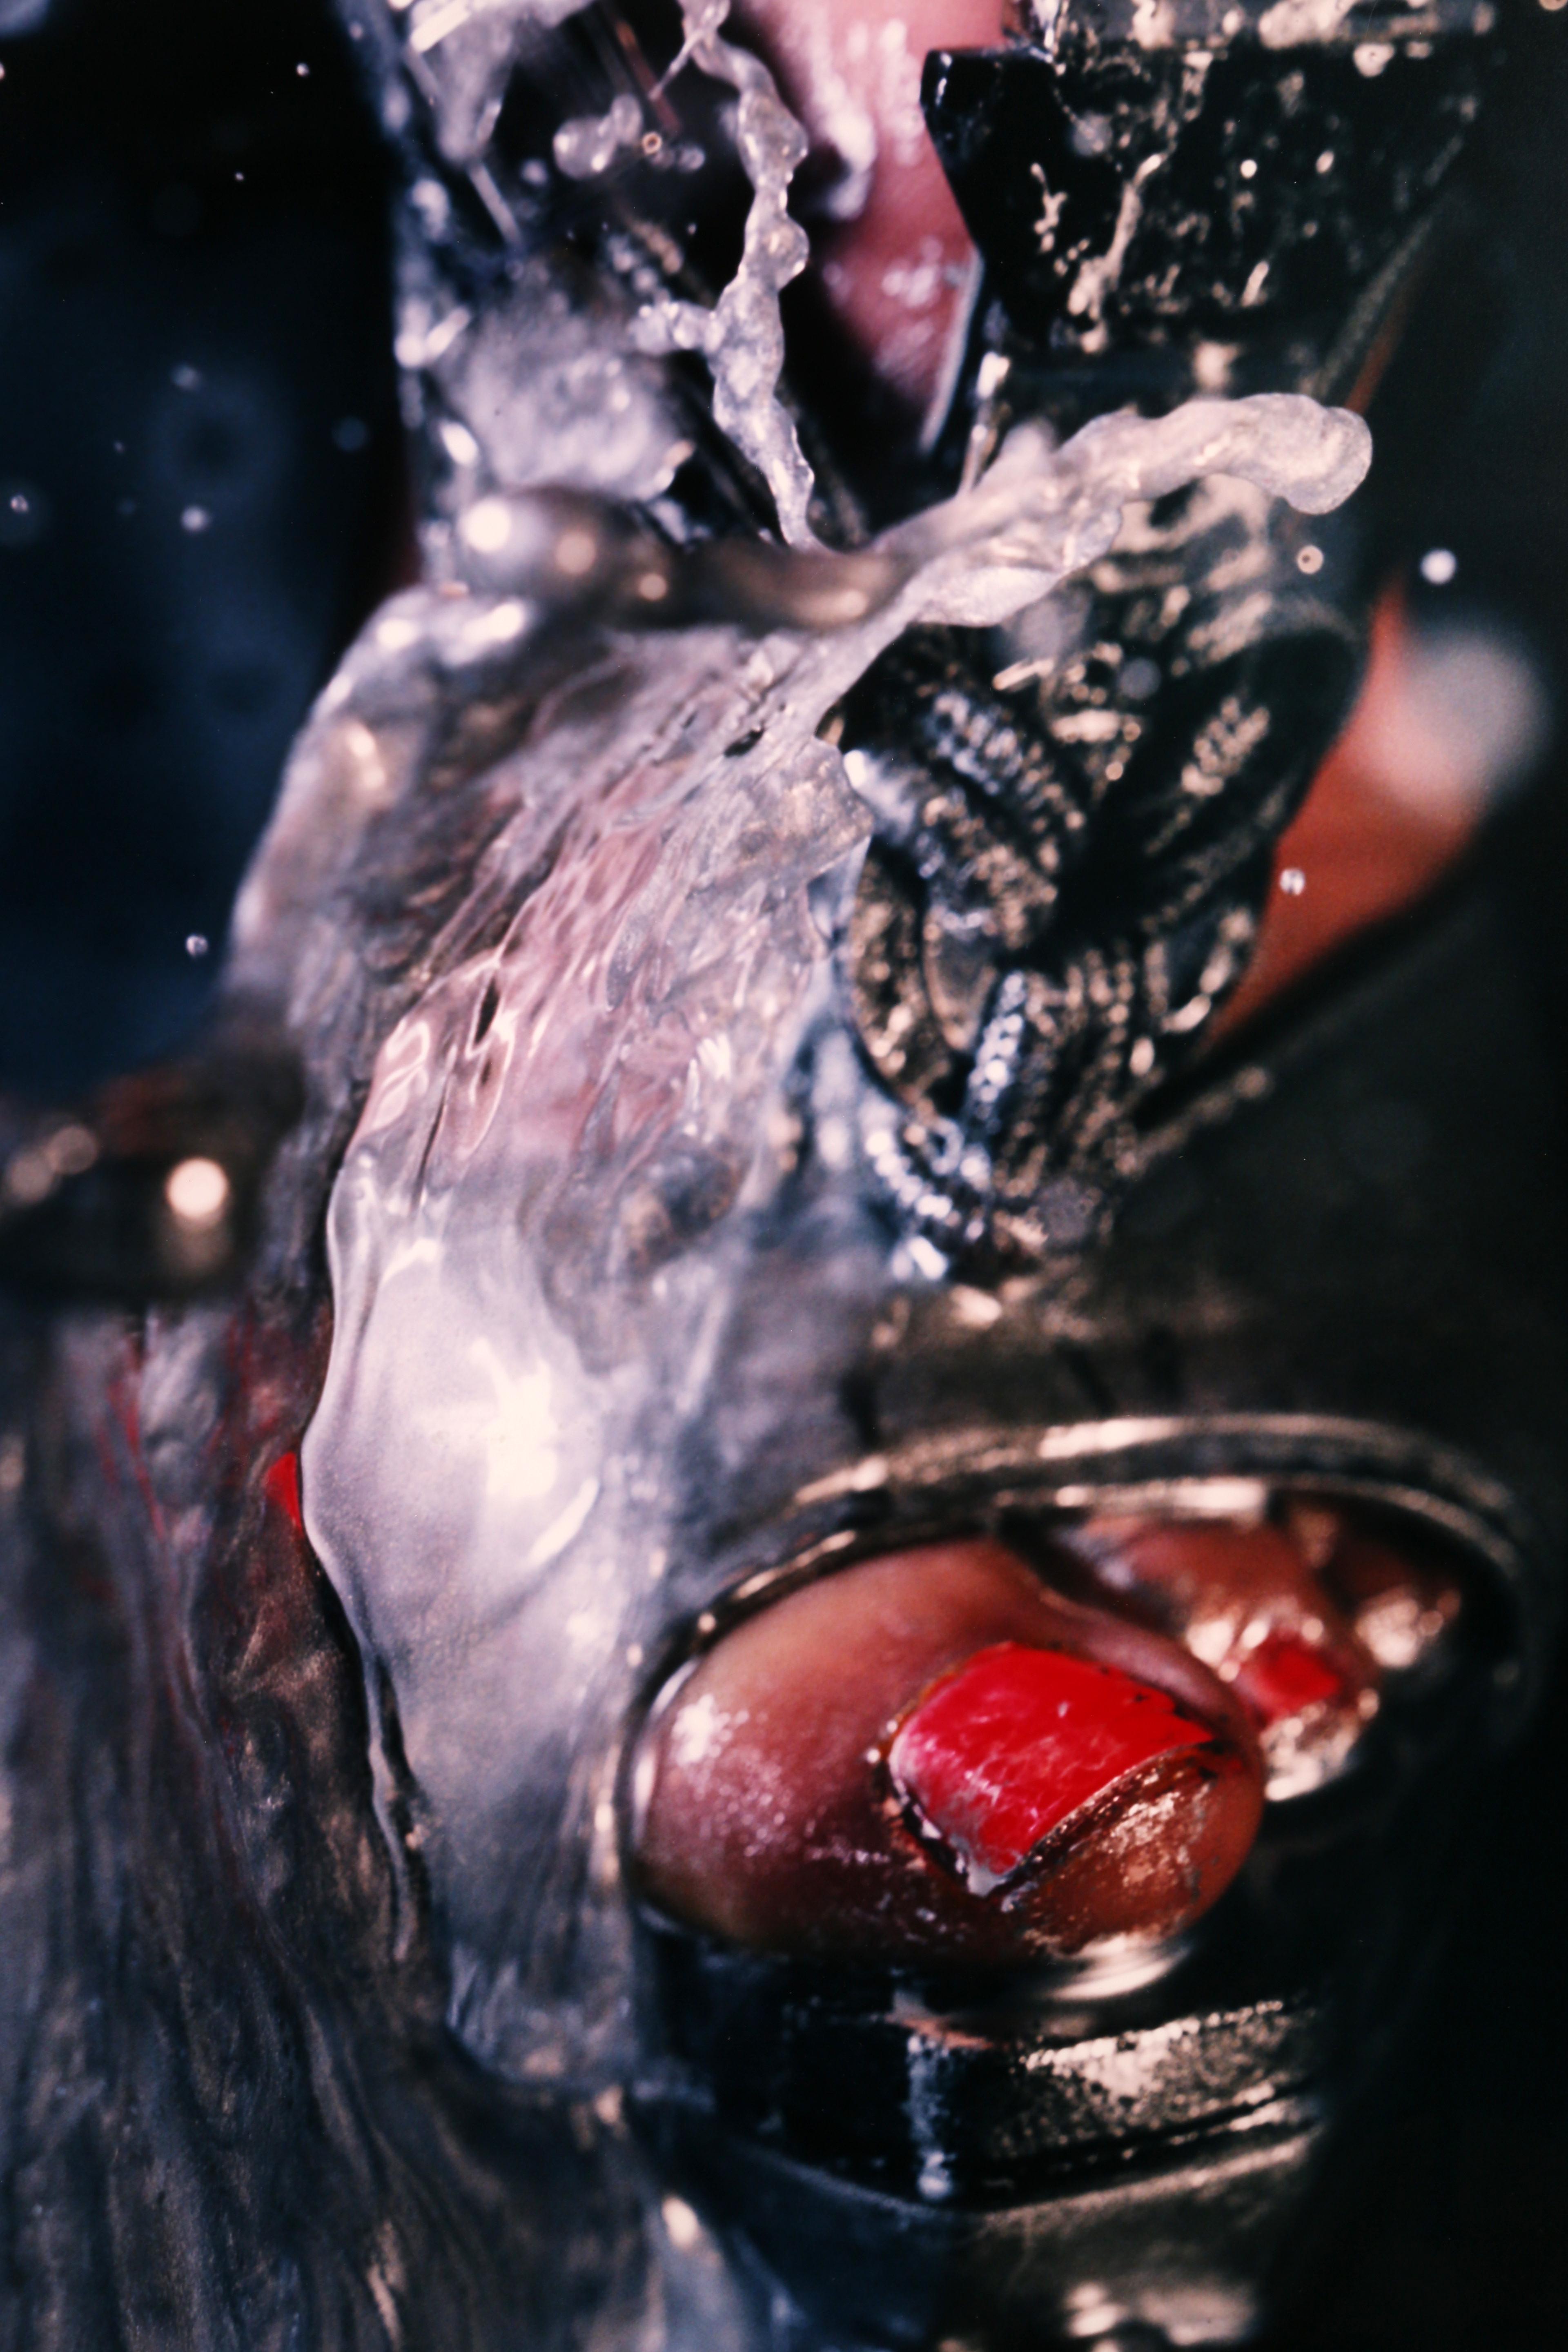 Swell  - Black Figurative Photograph by Marilyn Minter 